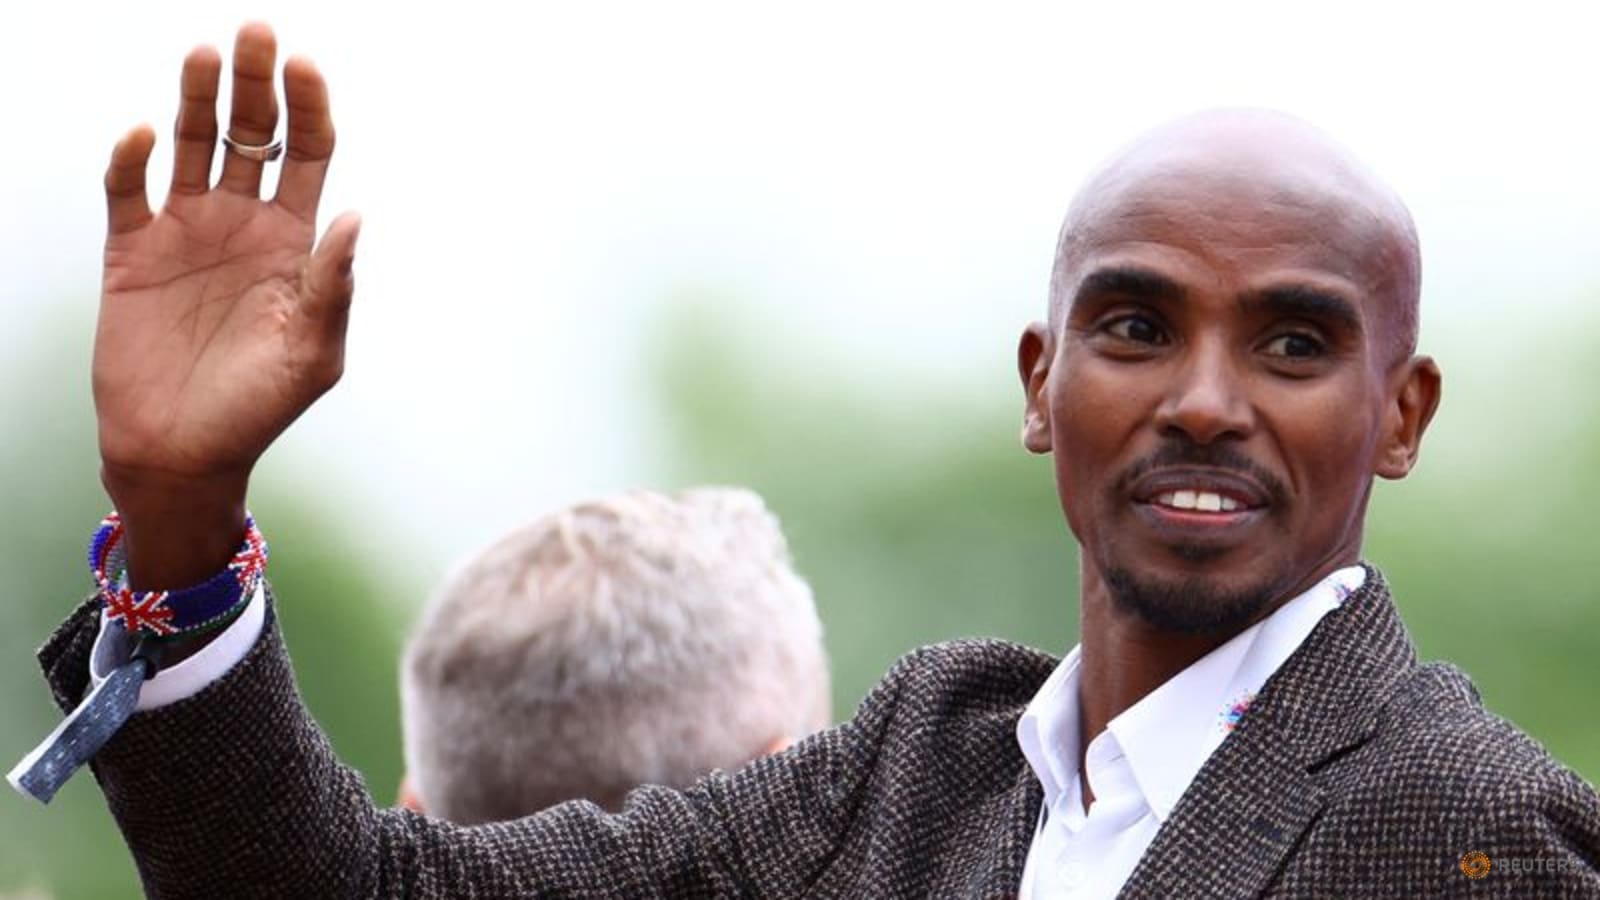 uk-police-investigate-after-mo-farah-says-he-was-child-trafficking-victim